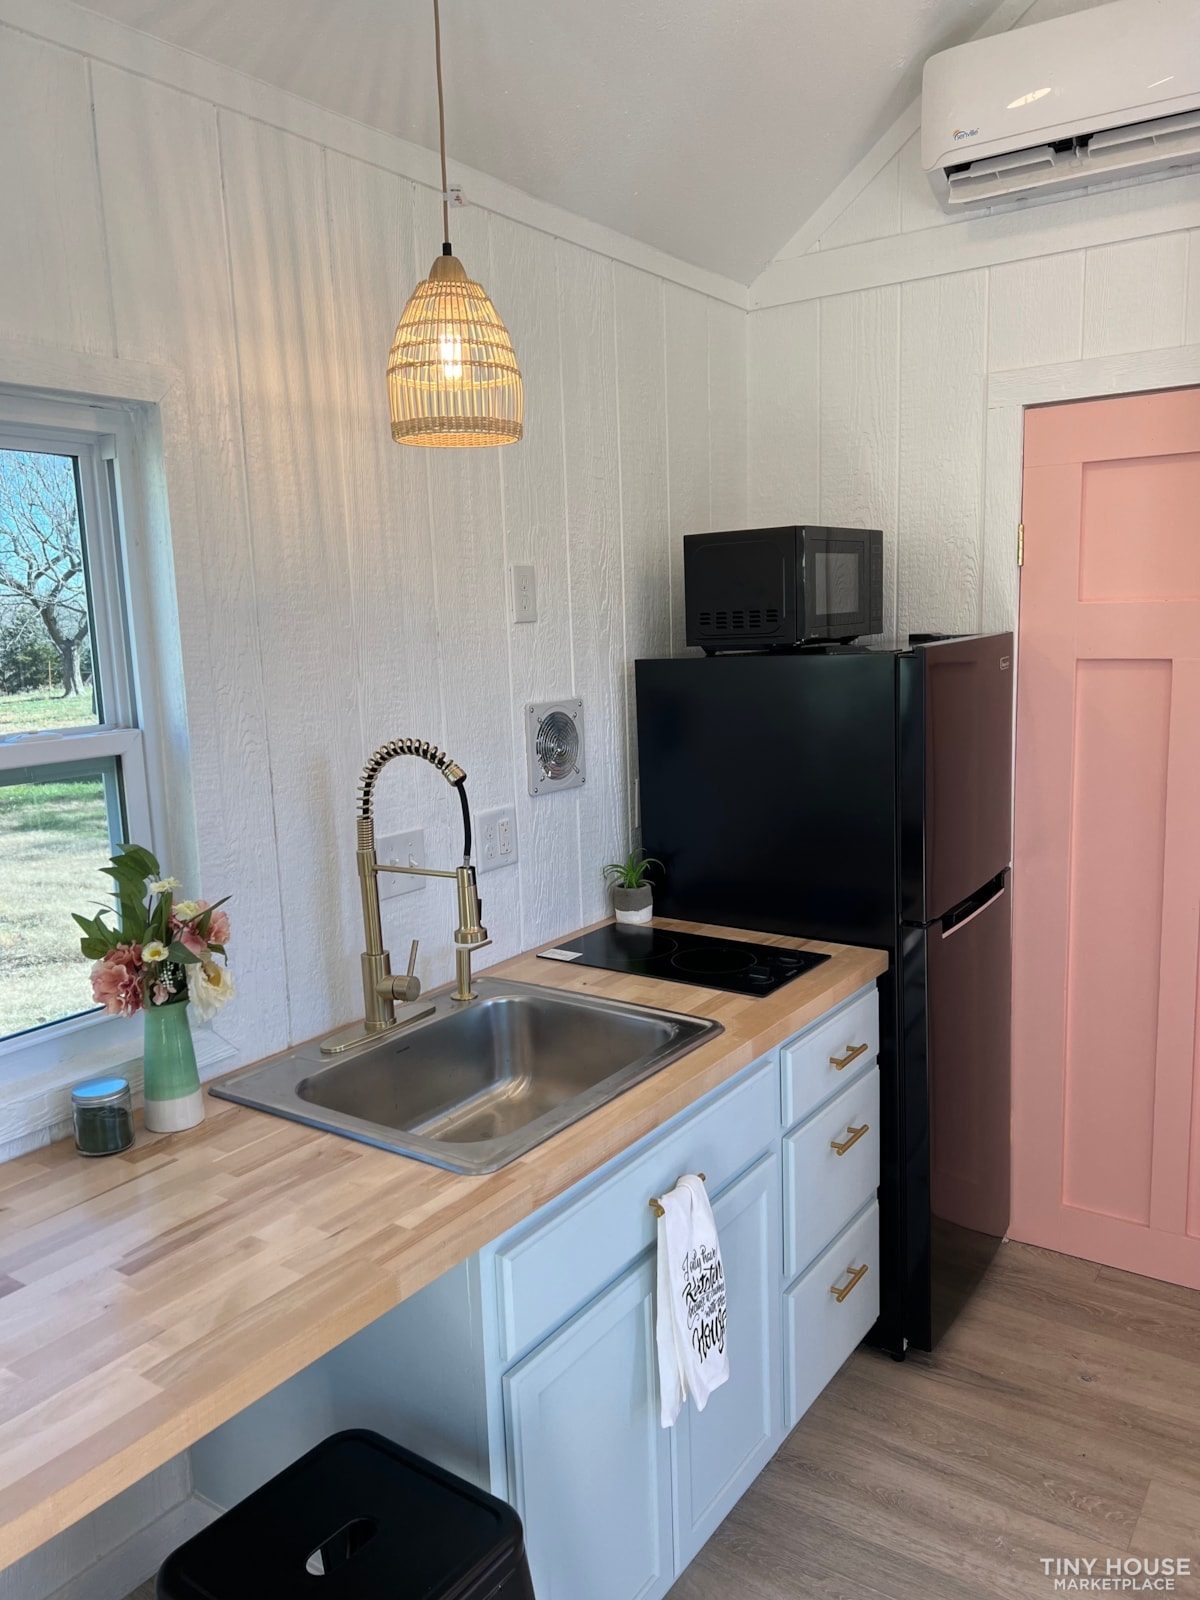 https://images.tinyhomebuilders.com/images/marketplaceimages/2023-kaiser-tiny-homes-rvia-RAVRIHMWL1-07.jpg?width=1200&mode=max